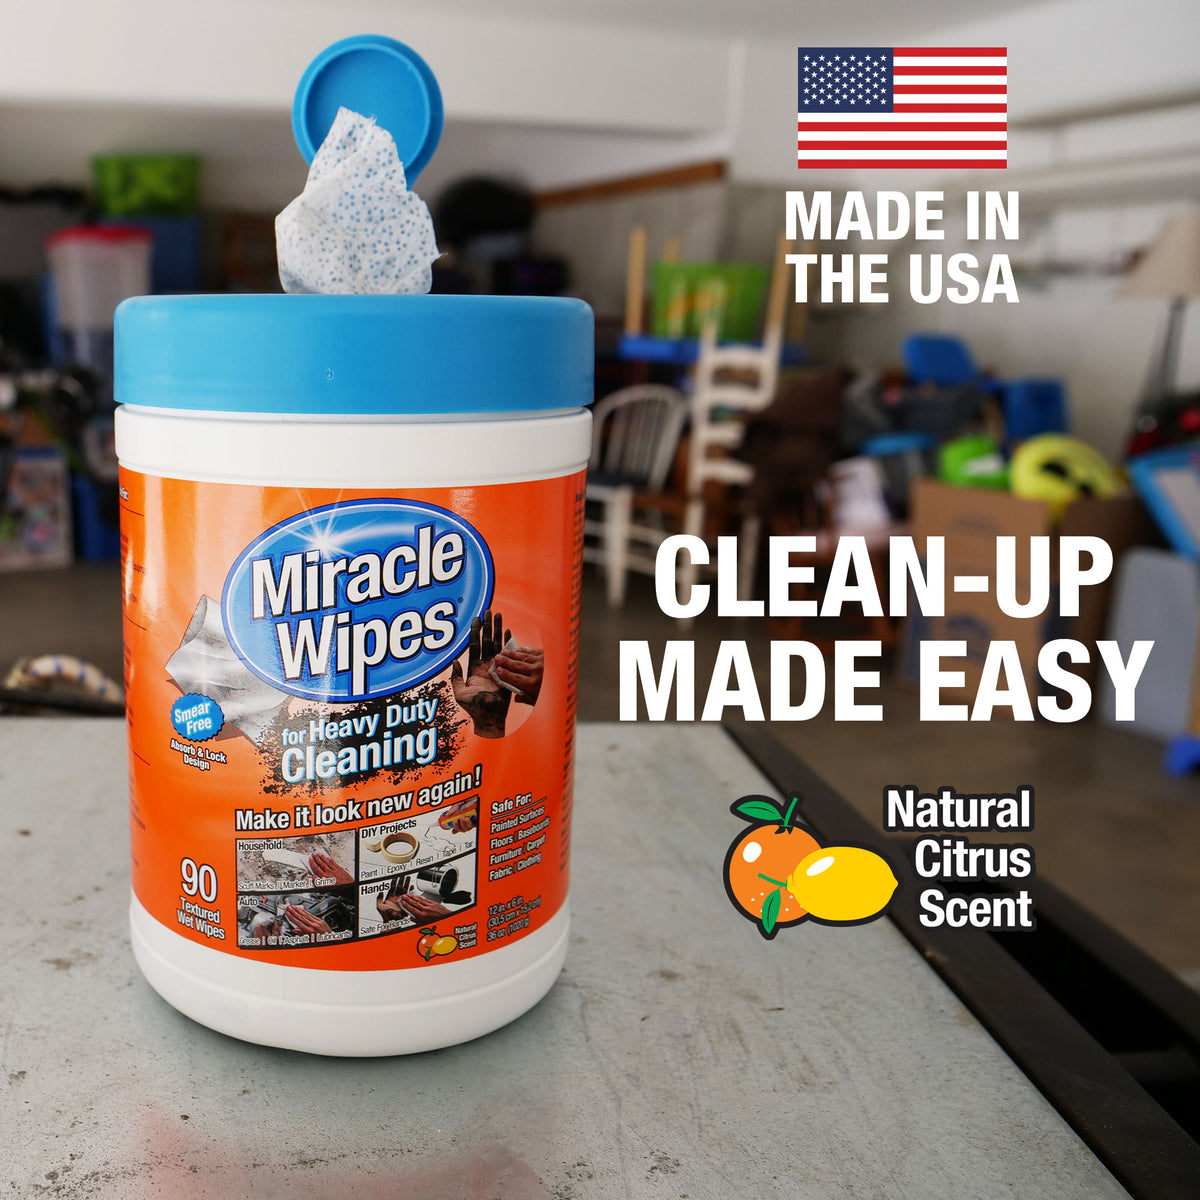 Miracle Wipes For Paint Clean Up Made Easy Profesional Grade Count